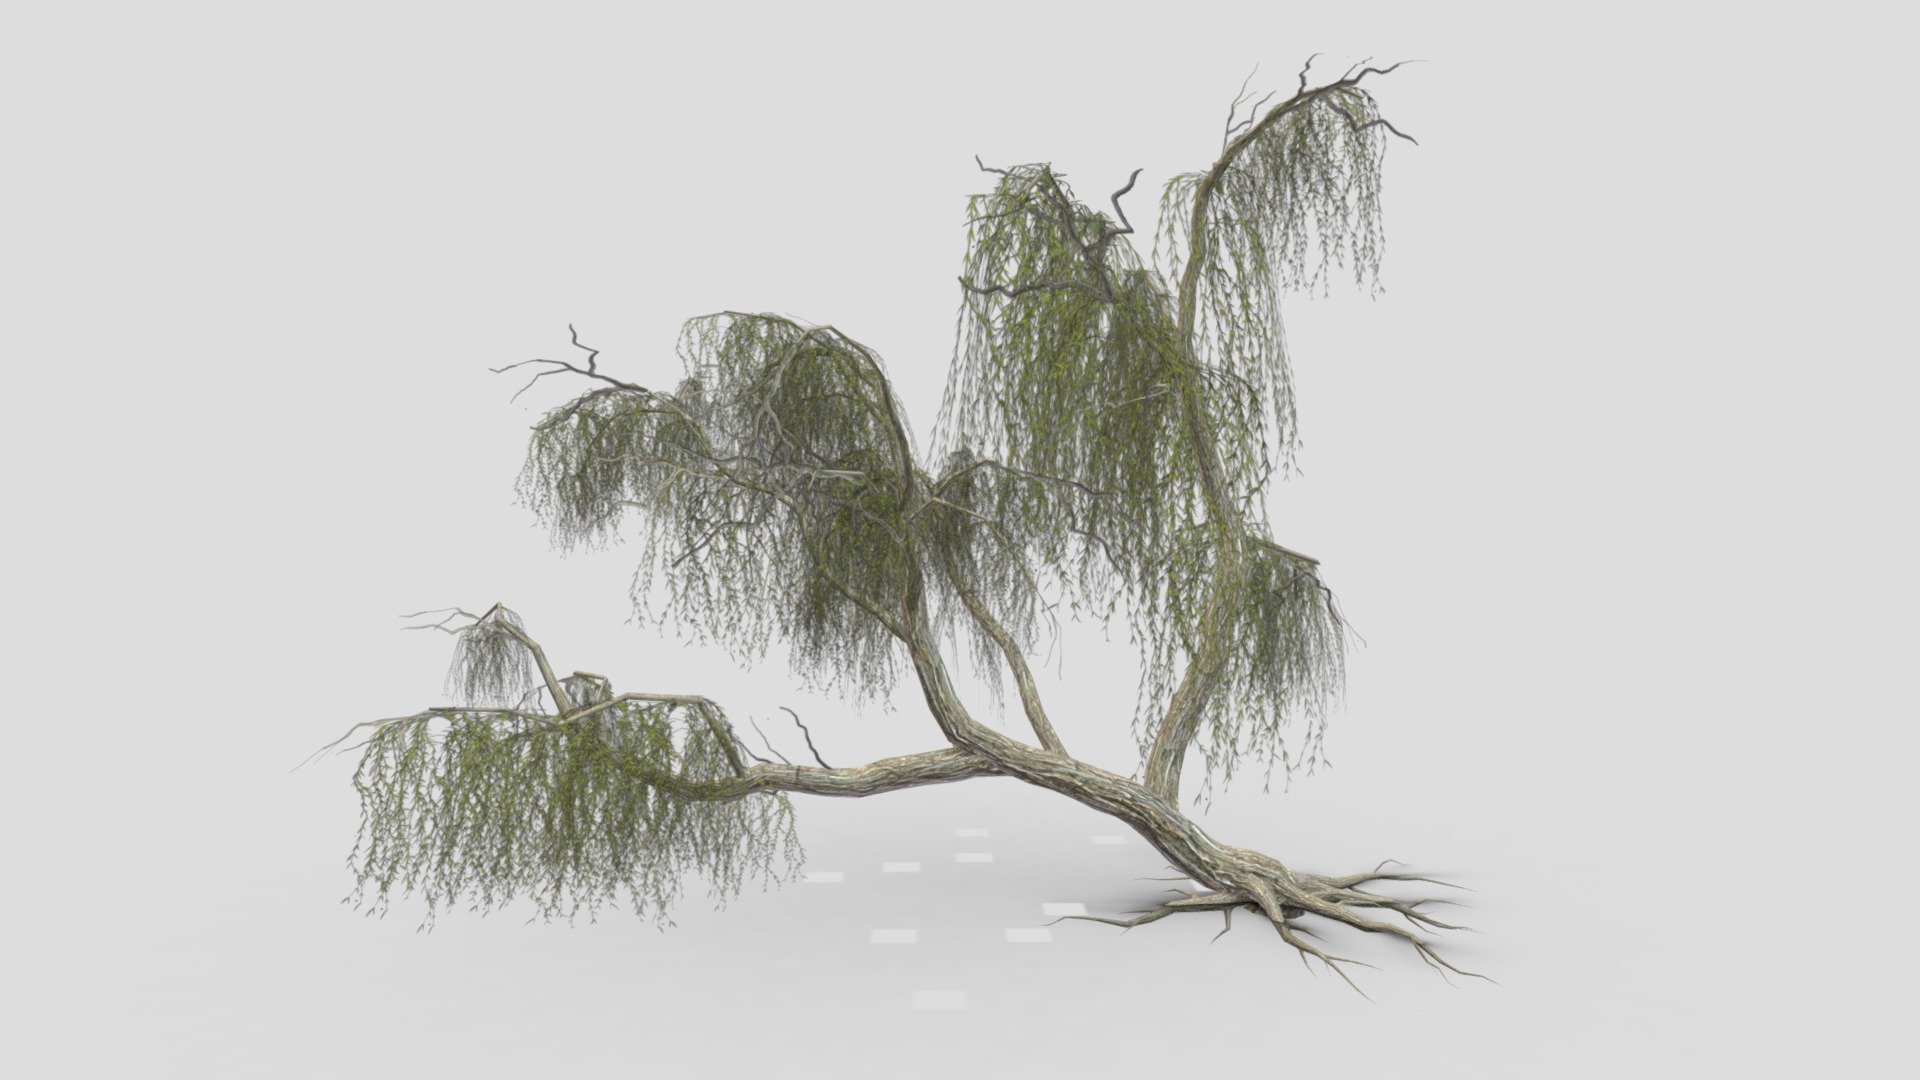 I try to provide low poly model of the Weeping Willow tree to use for your game project. I hope this model will be useful for you 3d model